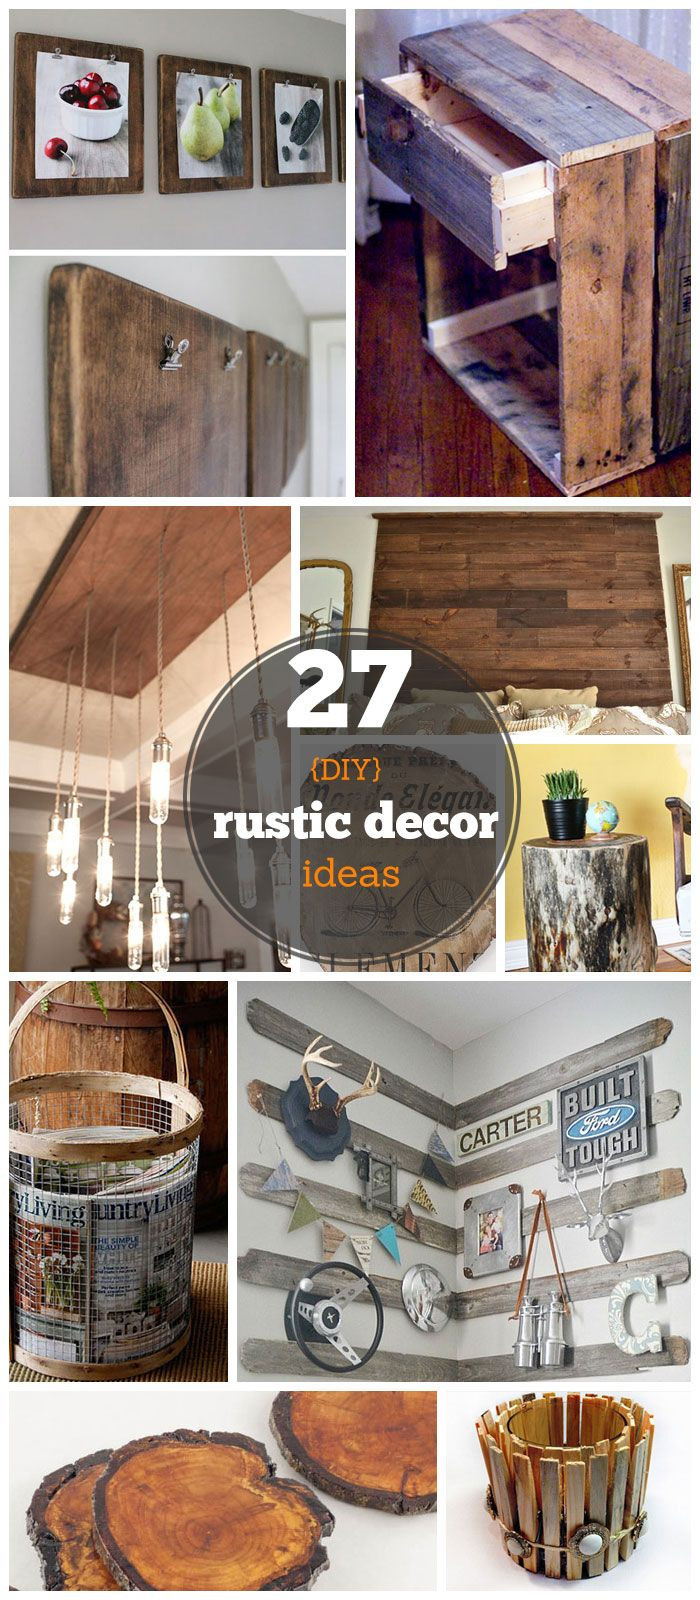 Cheap DIY Home Decor Projects
 27 DIY Rustic Decor Ideas for the Home